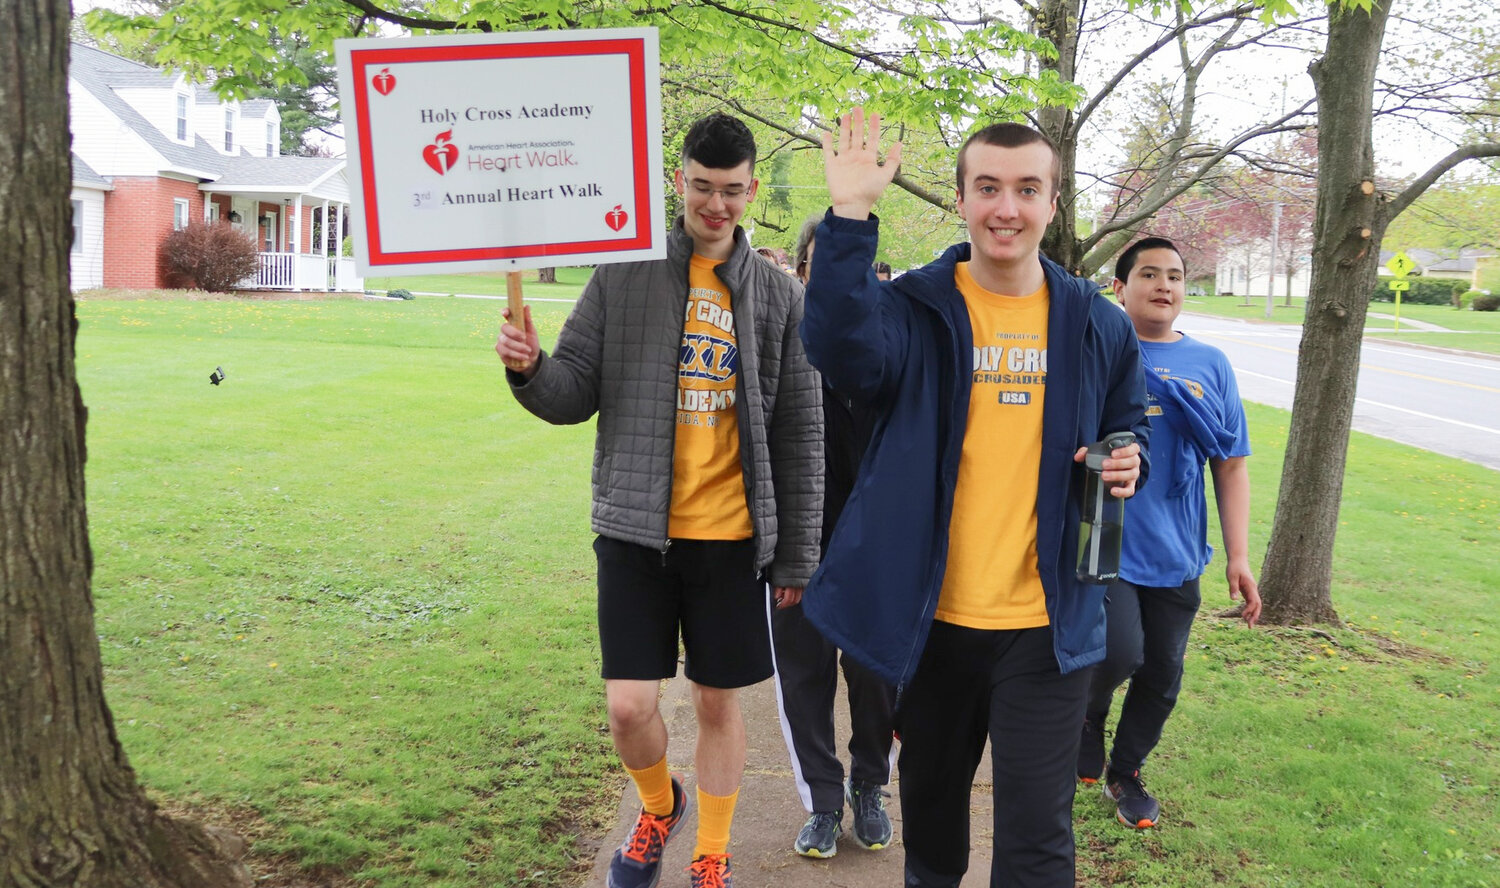 Students and staff at Holy Cross Academy in Oneida walked three miles to raise funds and awareness for heart disease and stroke